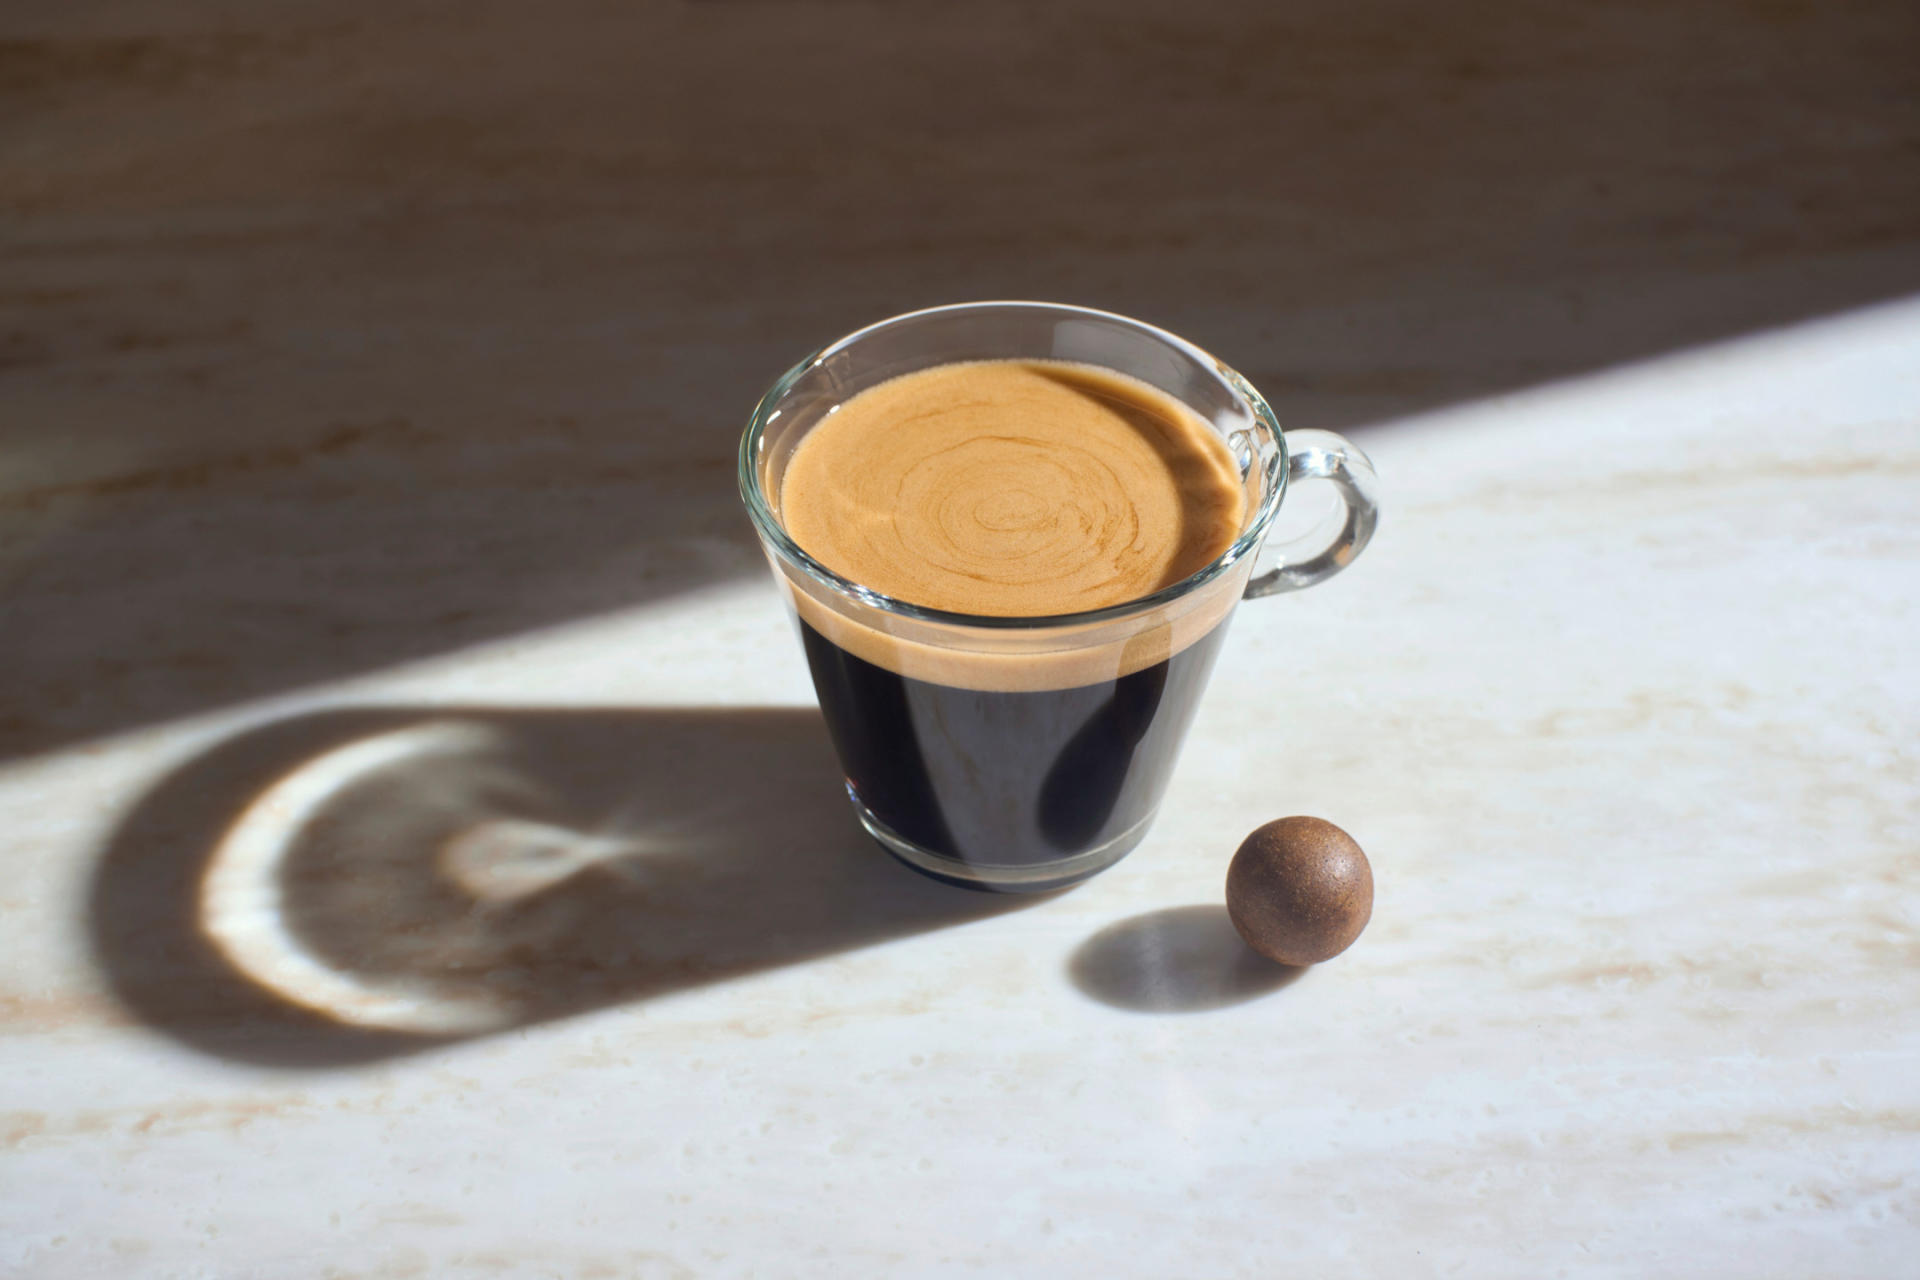 A cup of espresso next to a coffee ball.